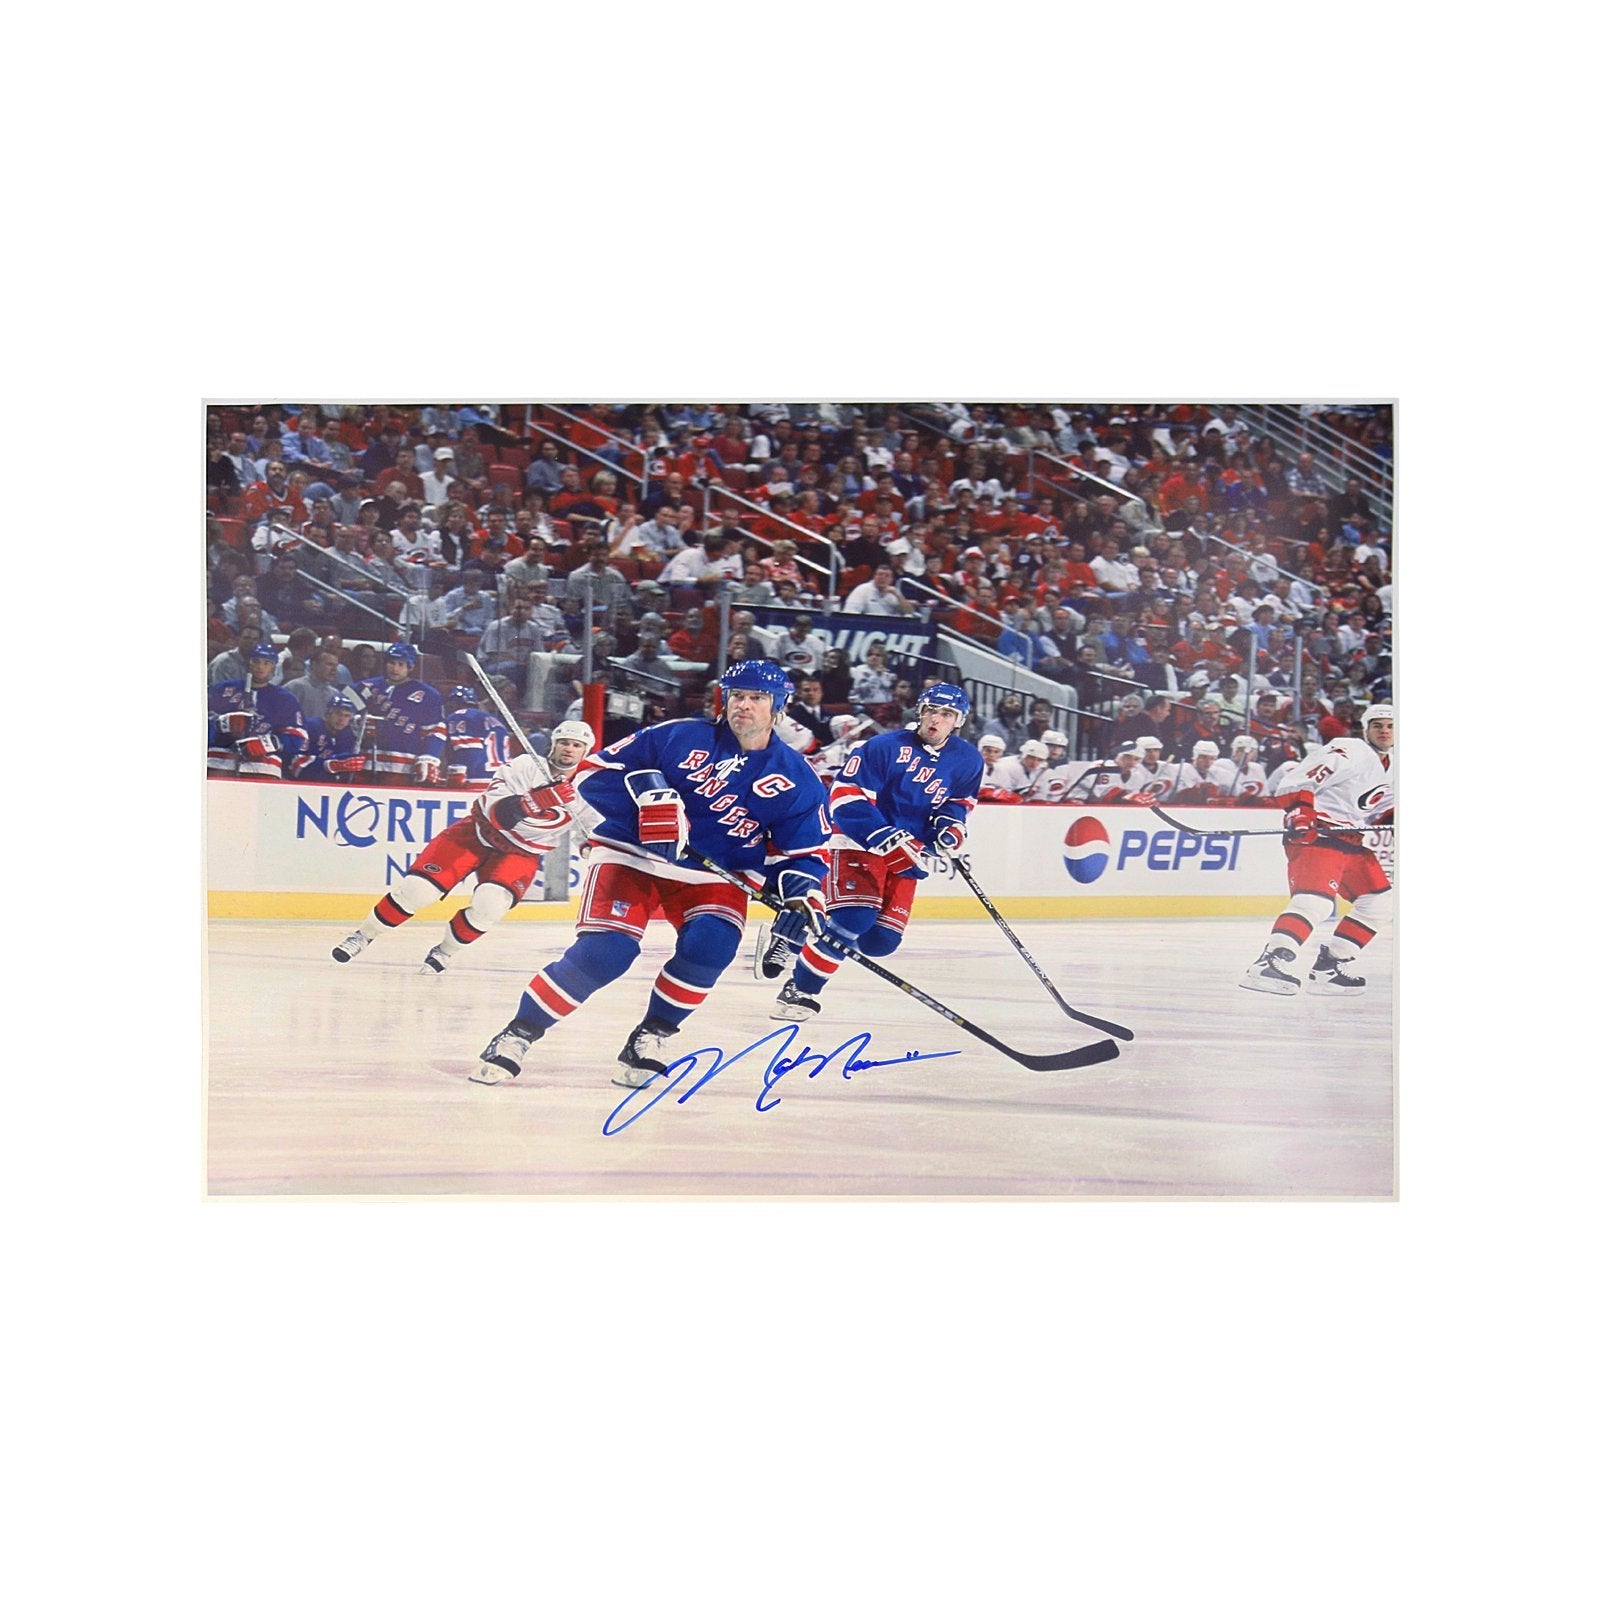 Autograph card signed by nhl hall of famer Mark Messier.